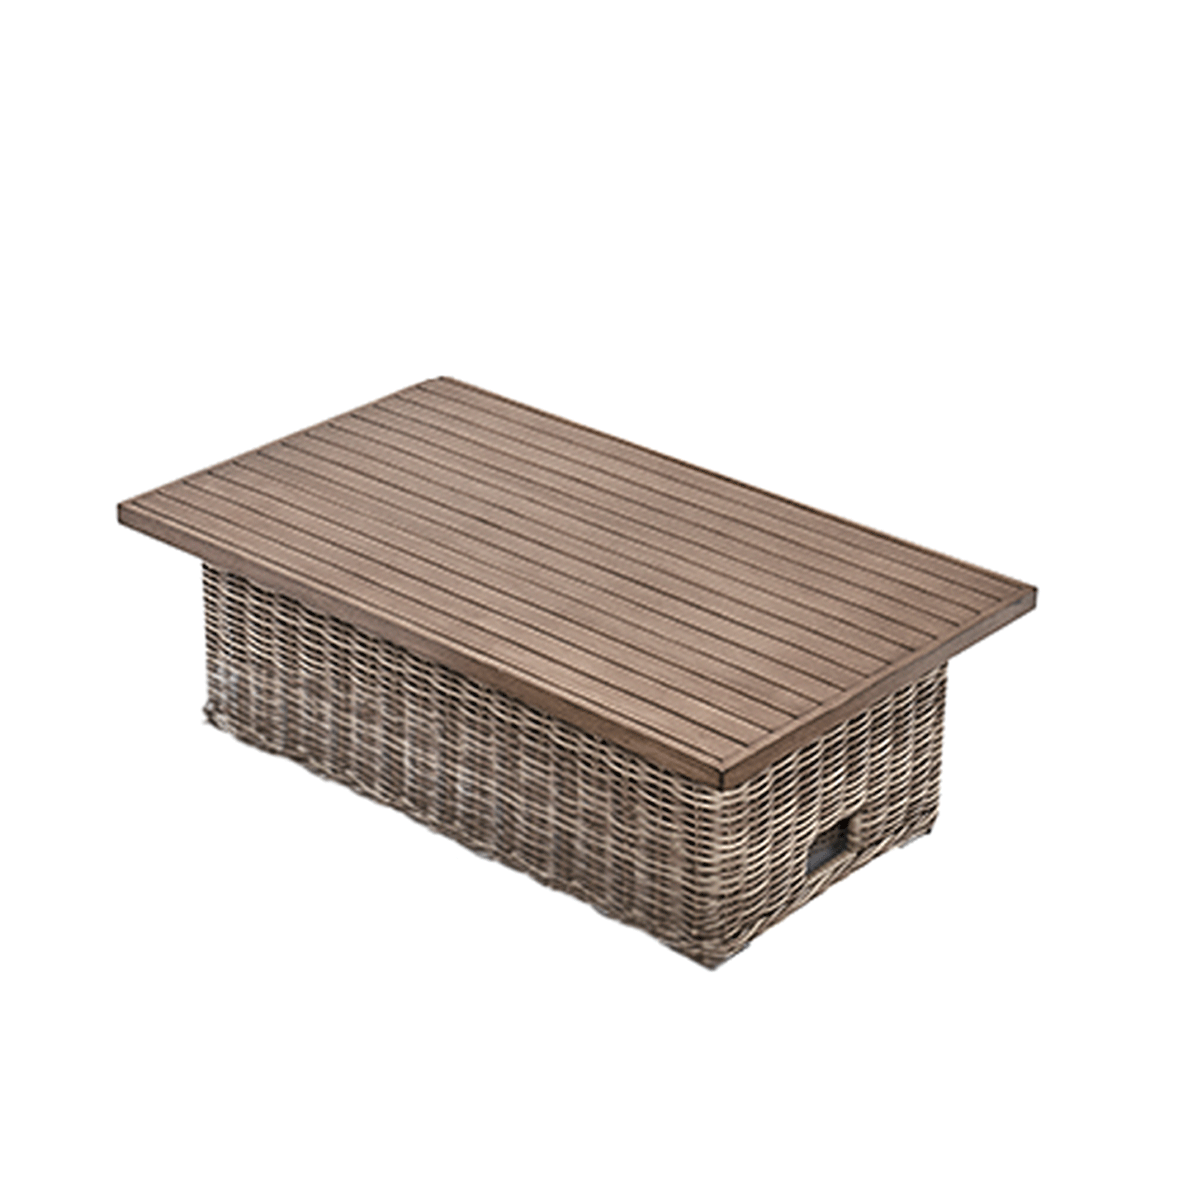 Bellagio Wicker Outdoor Rising Table, Natural